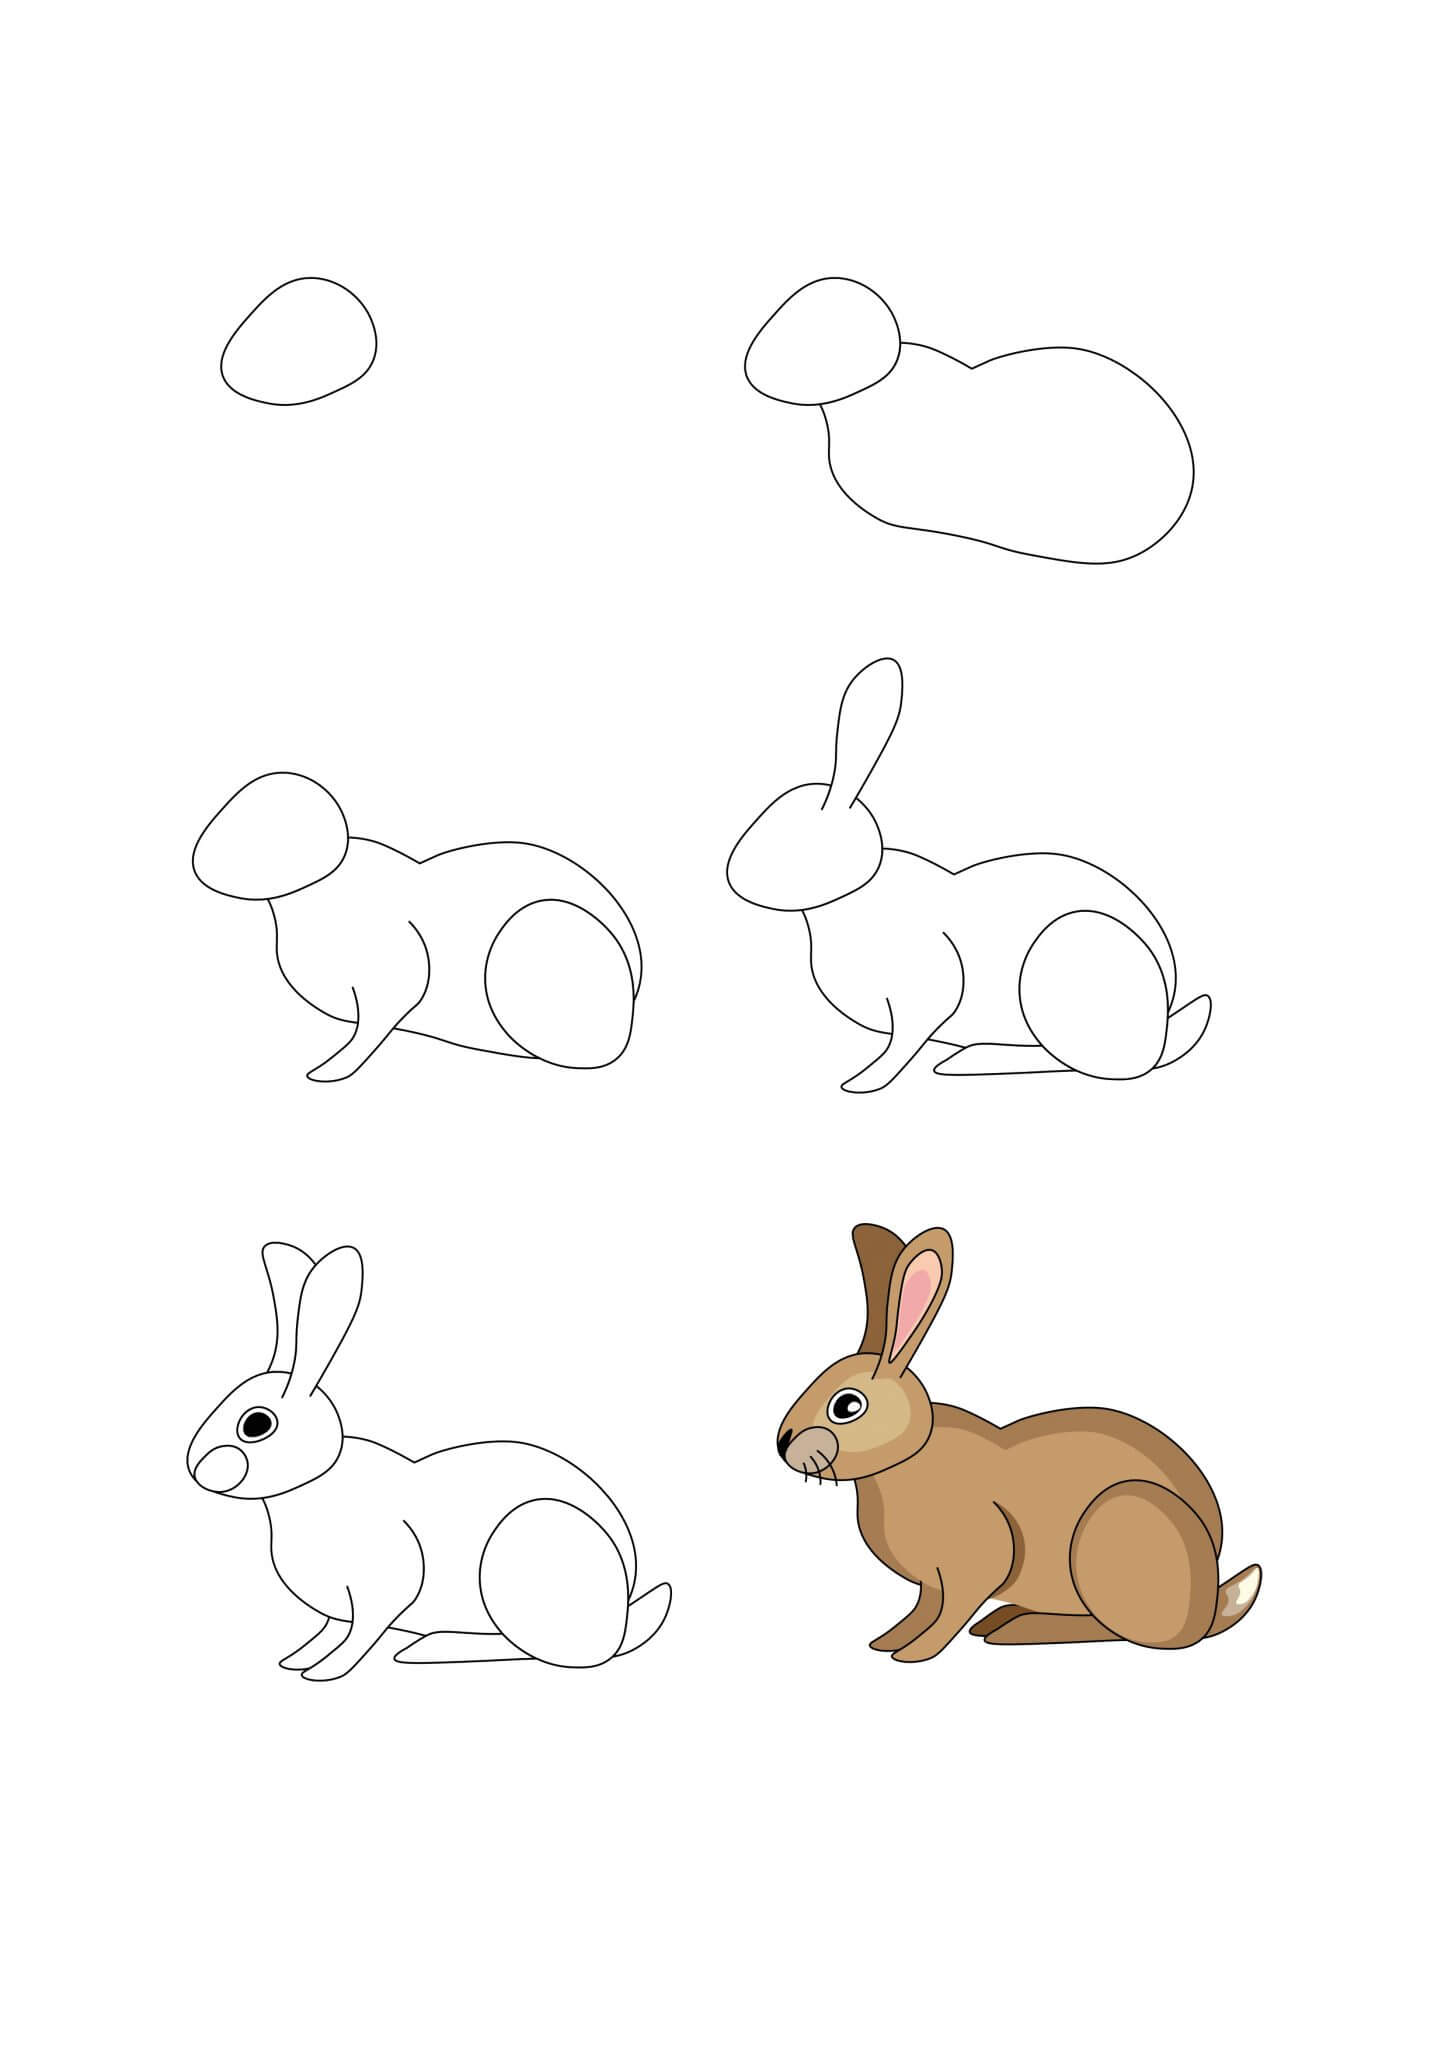 An Old Rabbit Drawing Ideas